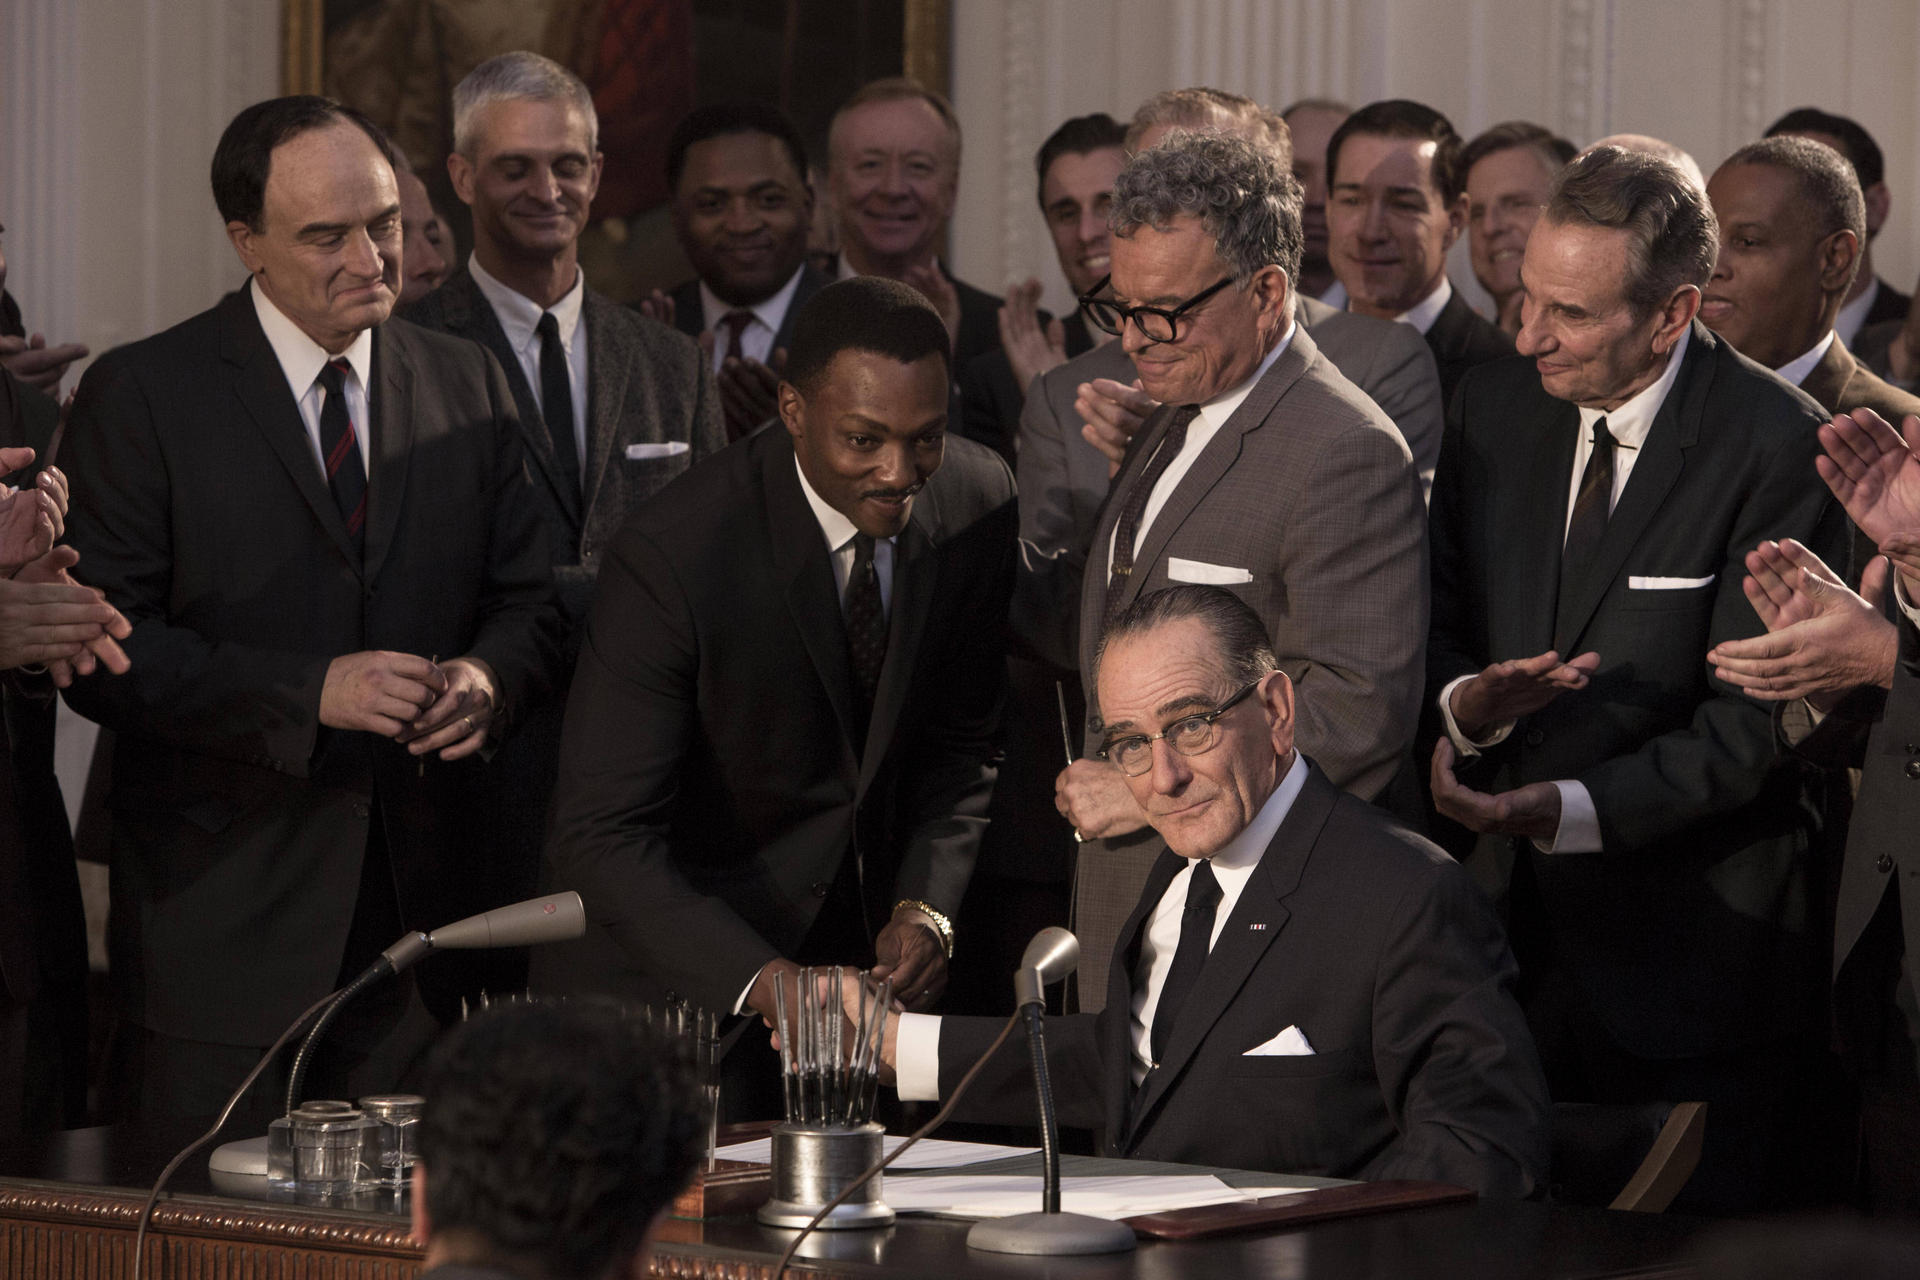 Martin Luther King (Anthony Mackie) shakes hands with Lyndon B. Johnson (Bryan Cranston, seated) in a still from All the Way.